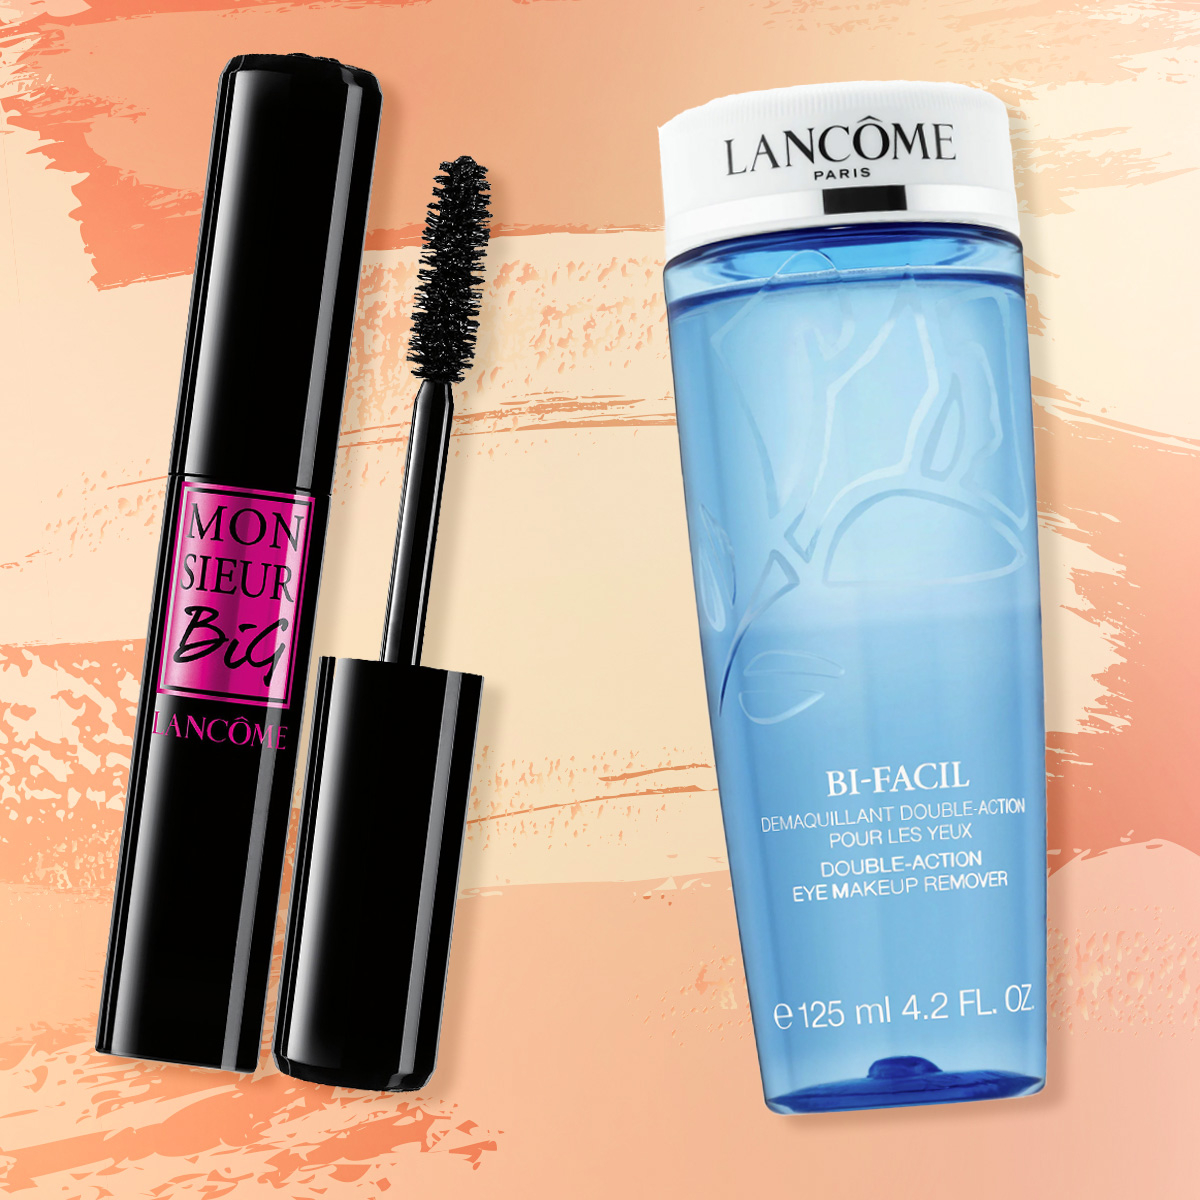 Sephora Oh Snap! Sale Get 50 Off Lancôme's Coveted Mascara & More